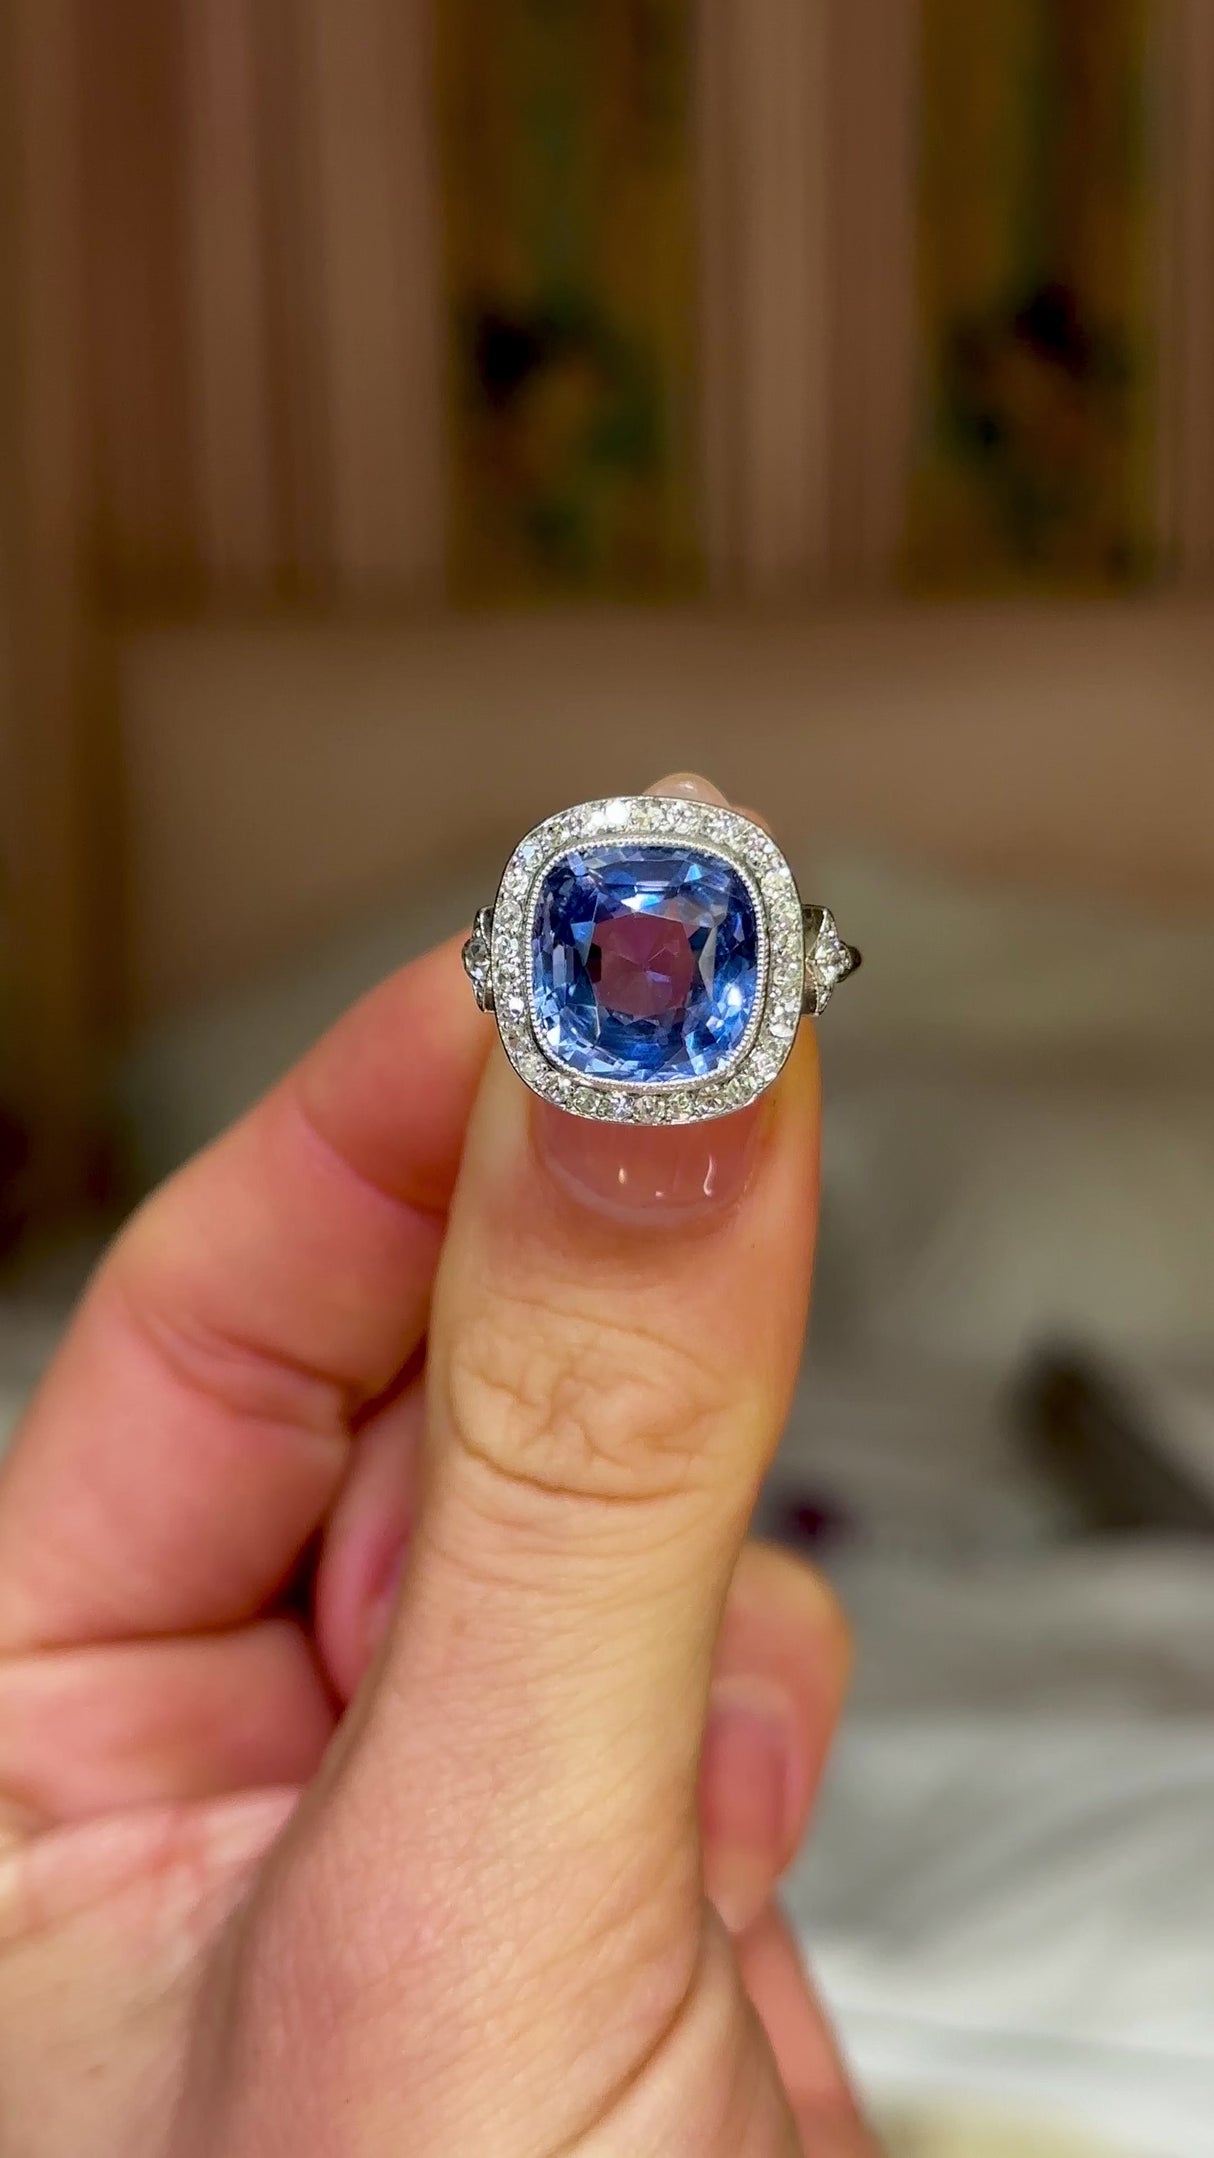 Antique, Belle Époque Sapphire and Diamond Cluster Ring, 18ct White Gold held in fingers and rotated to give perspective.